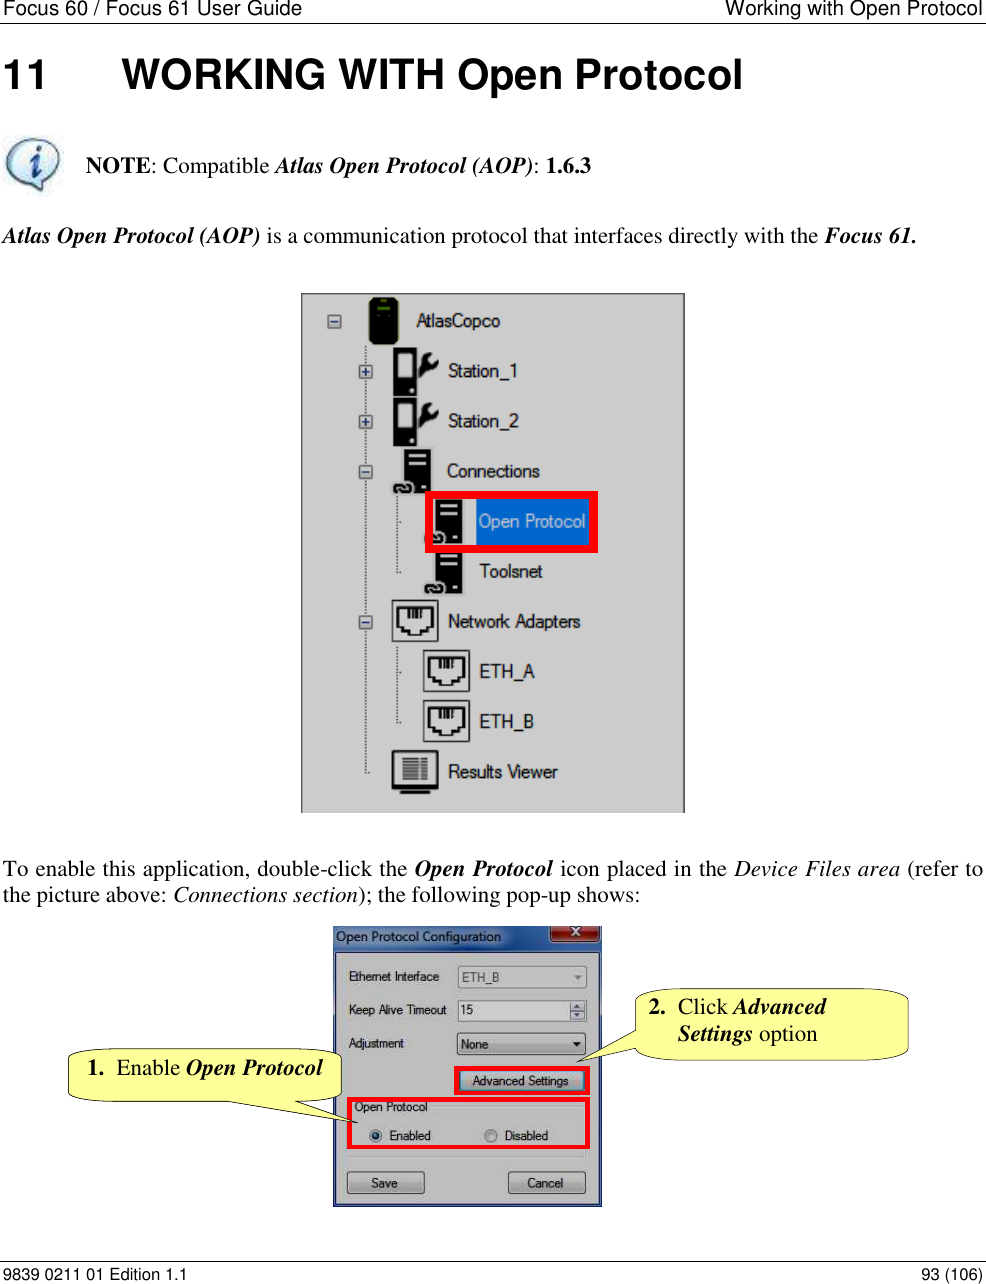 Focus 60 / Focus 61 User Guide  Working with Open Protocol   9839 0211 01 Edition 1.1    93 (106) 11  WORKING WITH Open Protocol  NOTE: Compatible Atlas Open Protocol (AOP): 1.6.3  Atlas Open Protocol (AOP) is a communication protocol that interfaces directly with the Focus 61.  To enable this application, double-click the Open Protocol icon placed in the Device Files area (refer to the picture above: Connections section); the following pop-up shows:  2. Enable Open Protocol 2. Click Advanced Settings option 1. Enable Open Protocol 